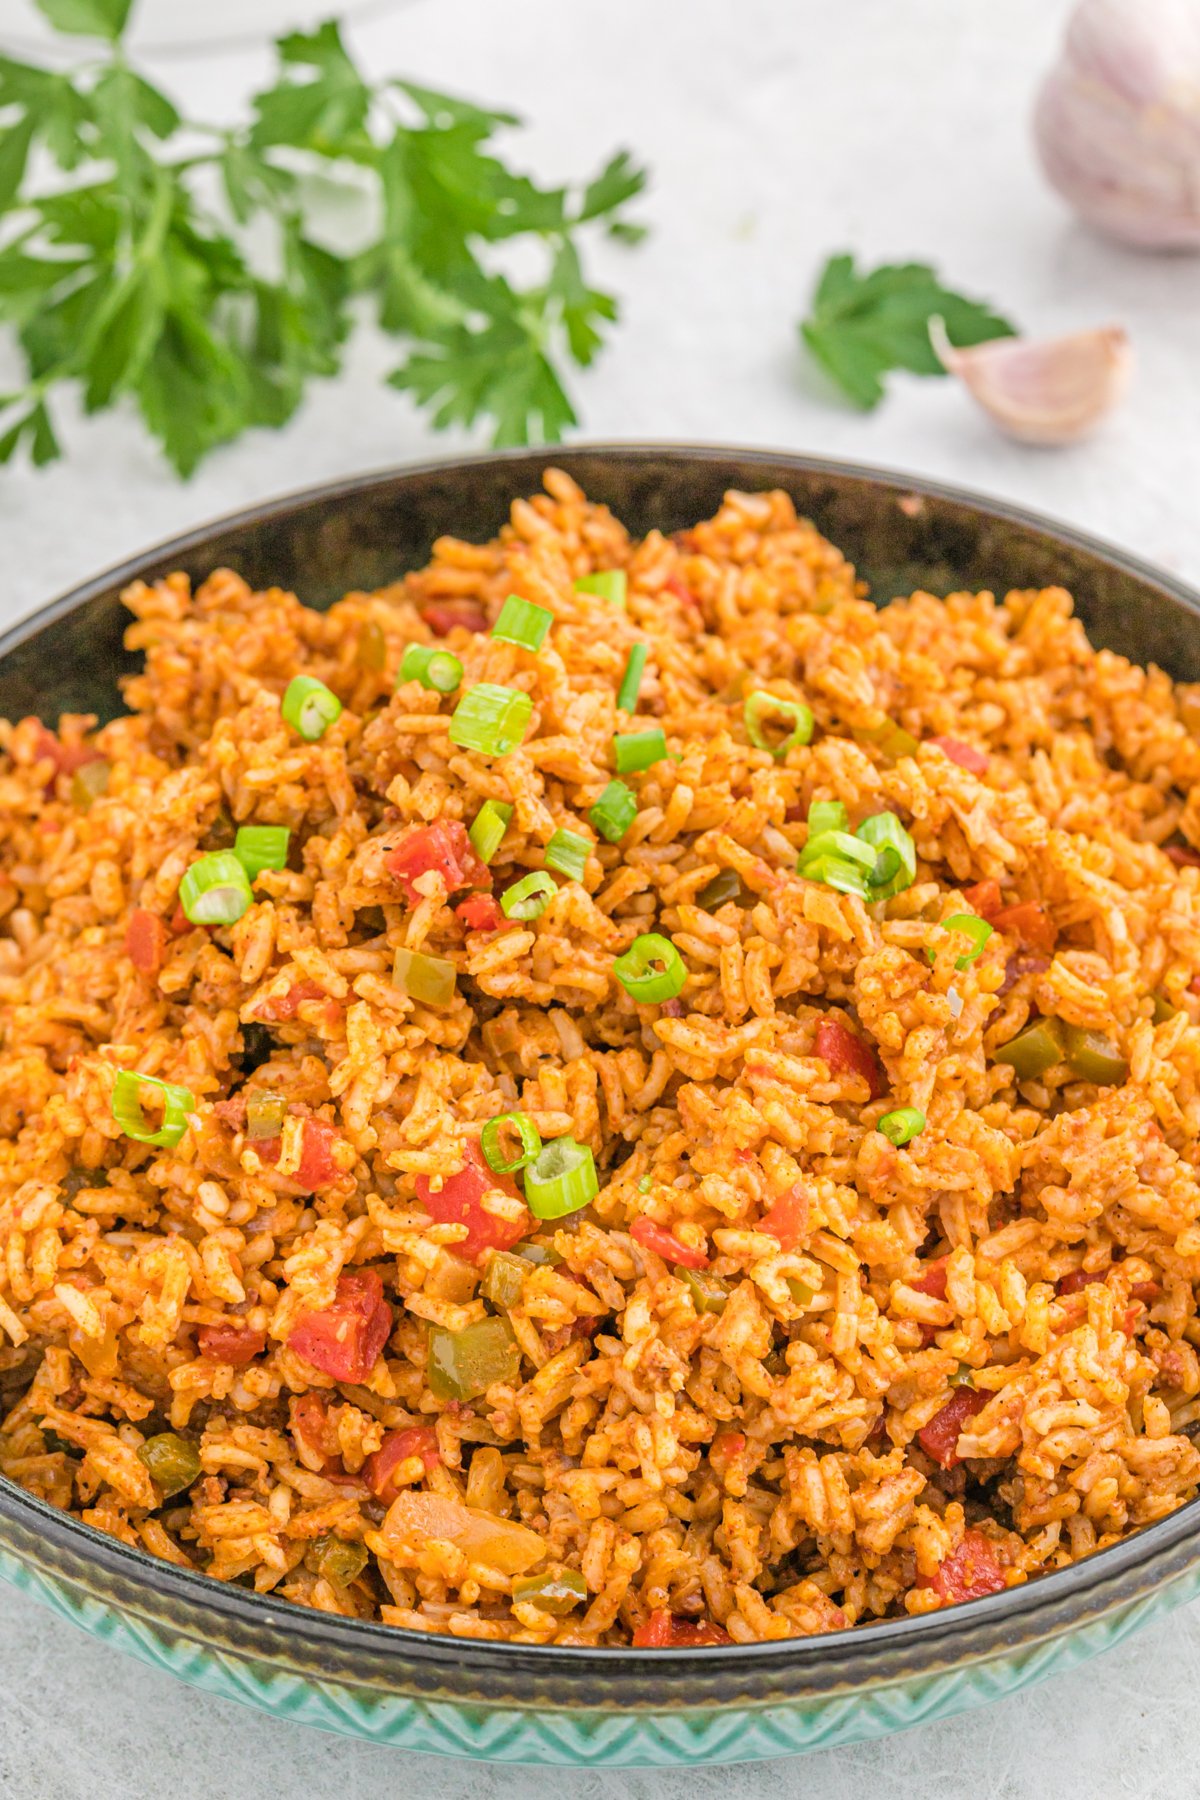 A close up of Mexican rice ready to enjoy